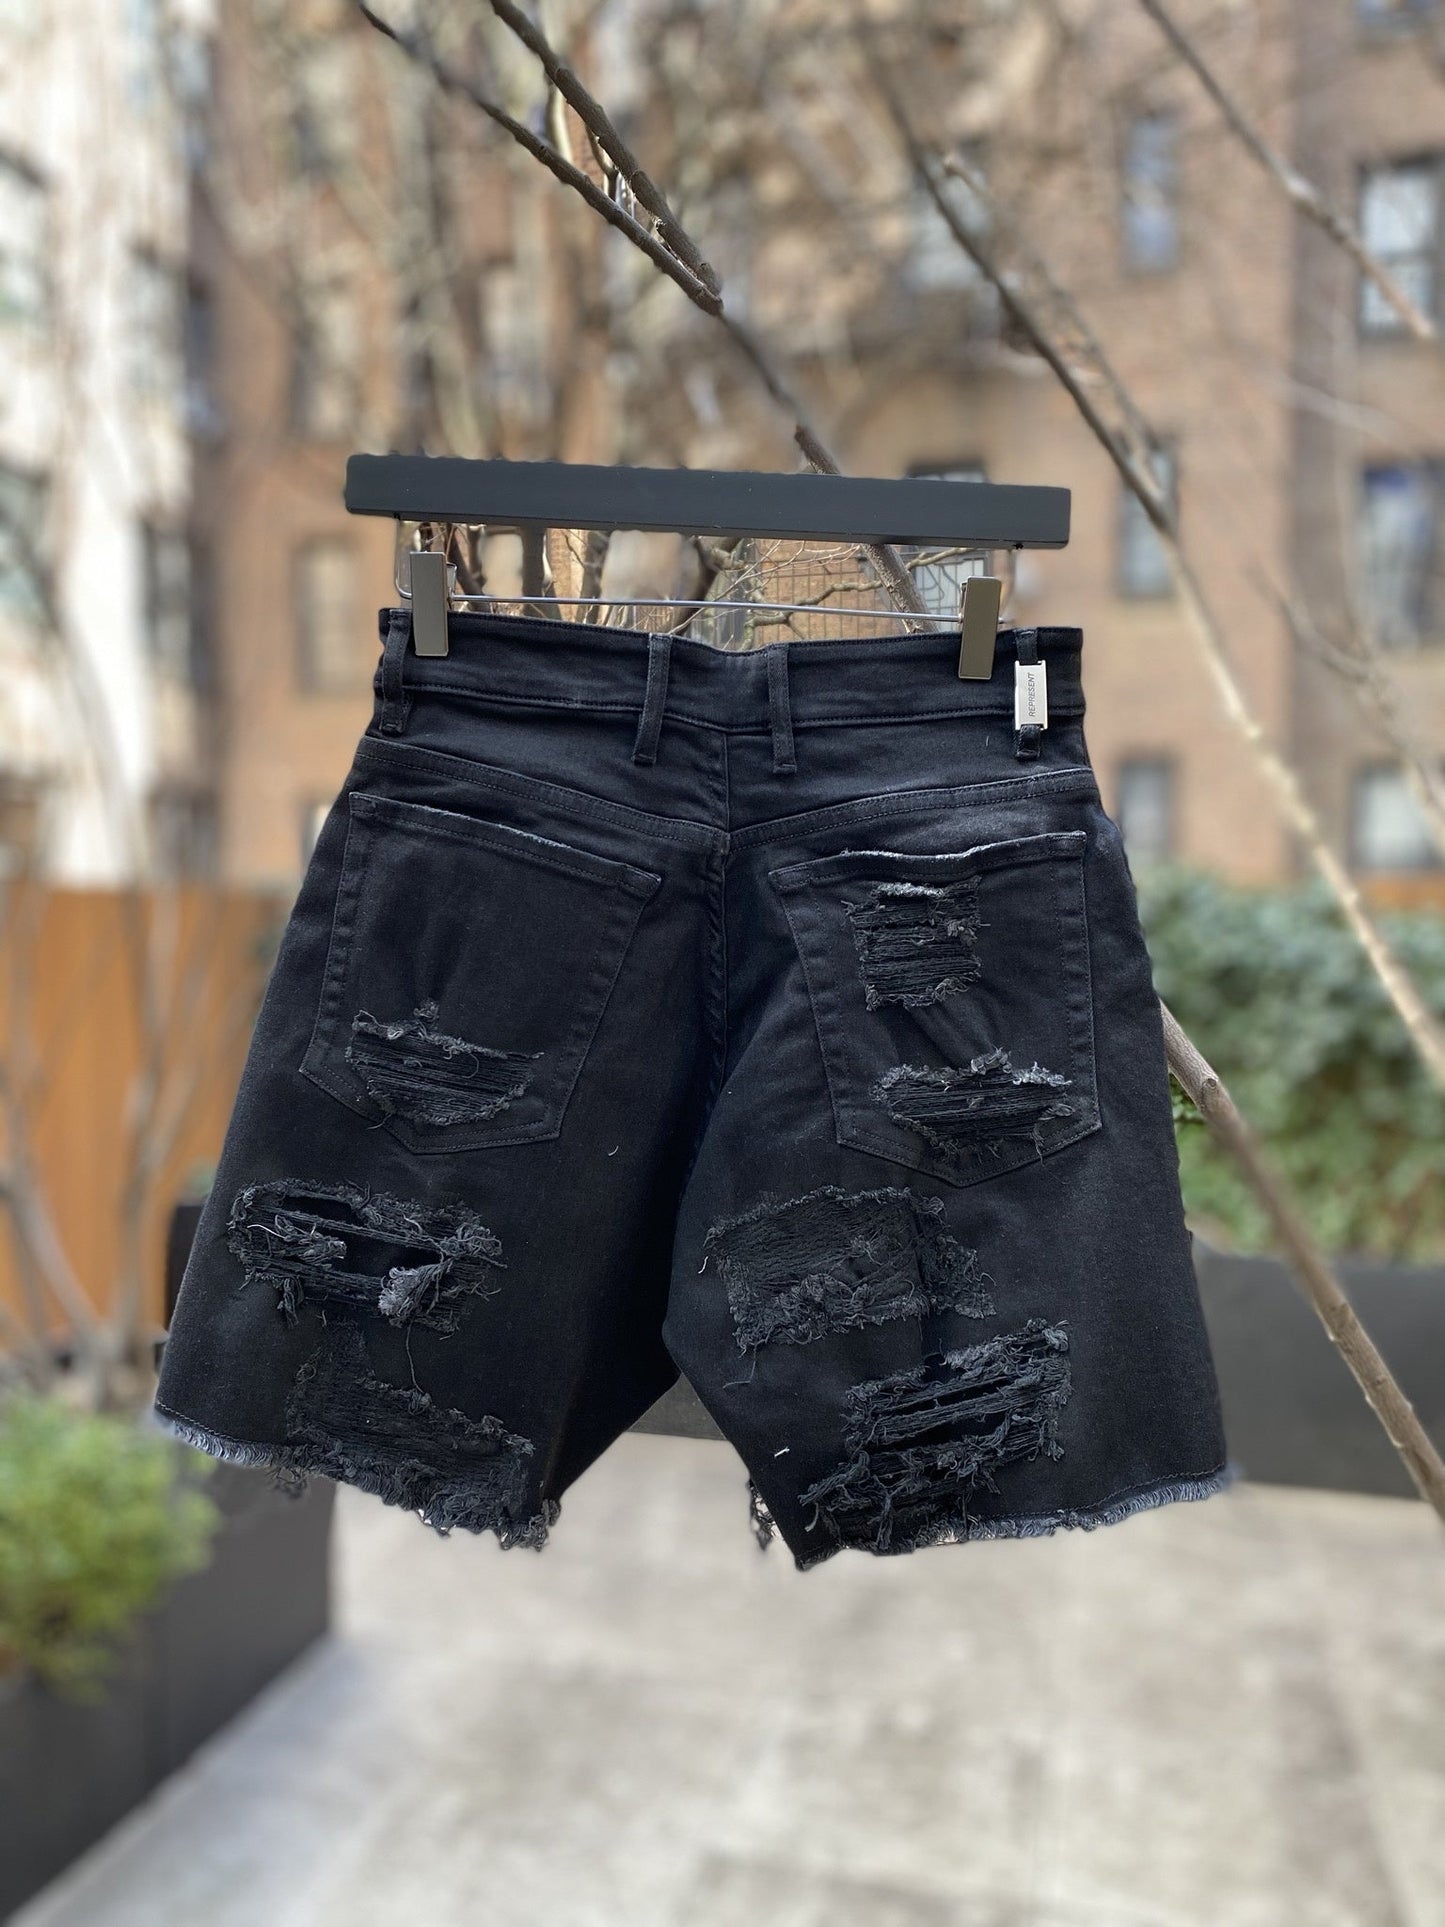 A pair of REPRESENT's M07062 SHREDDED DENIM SHORTS BLACK hanging on a tree.